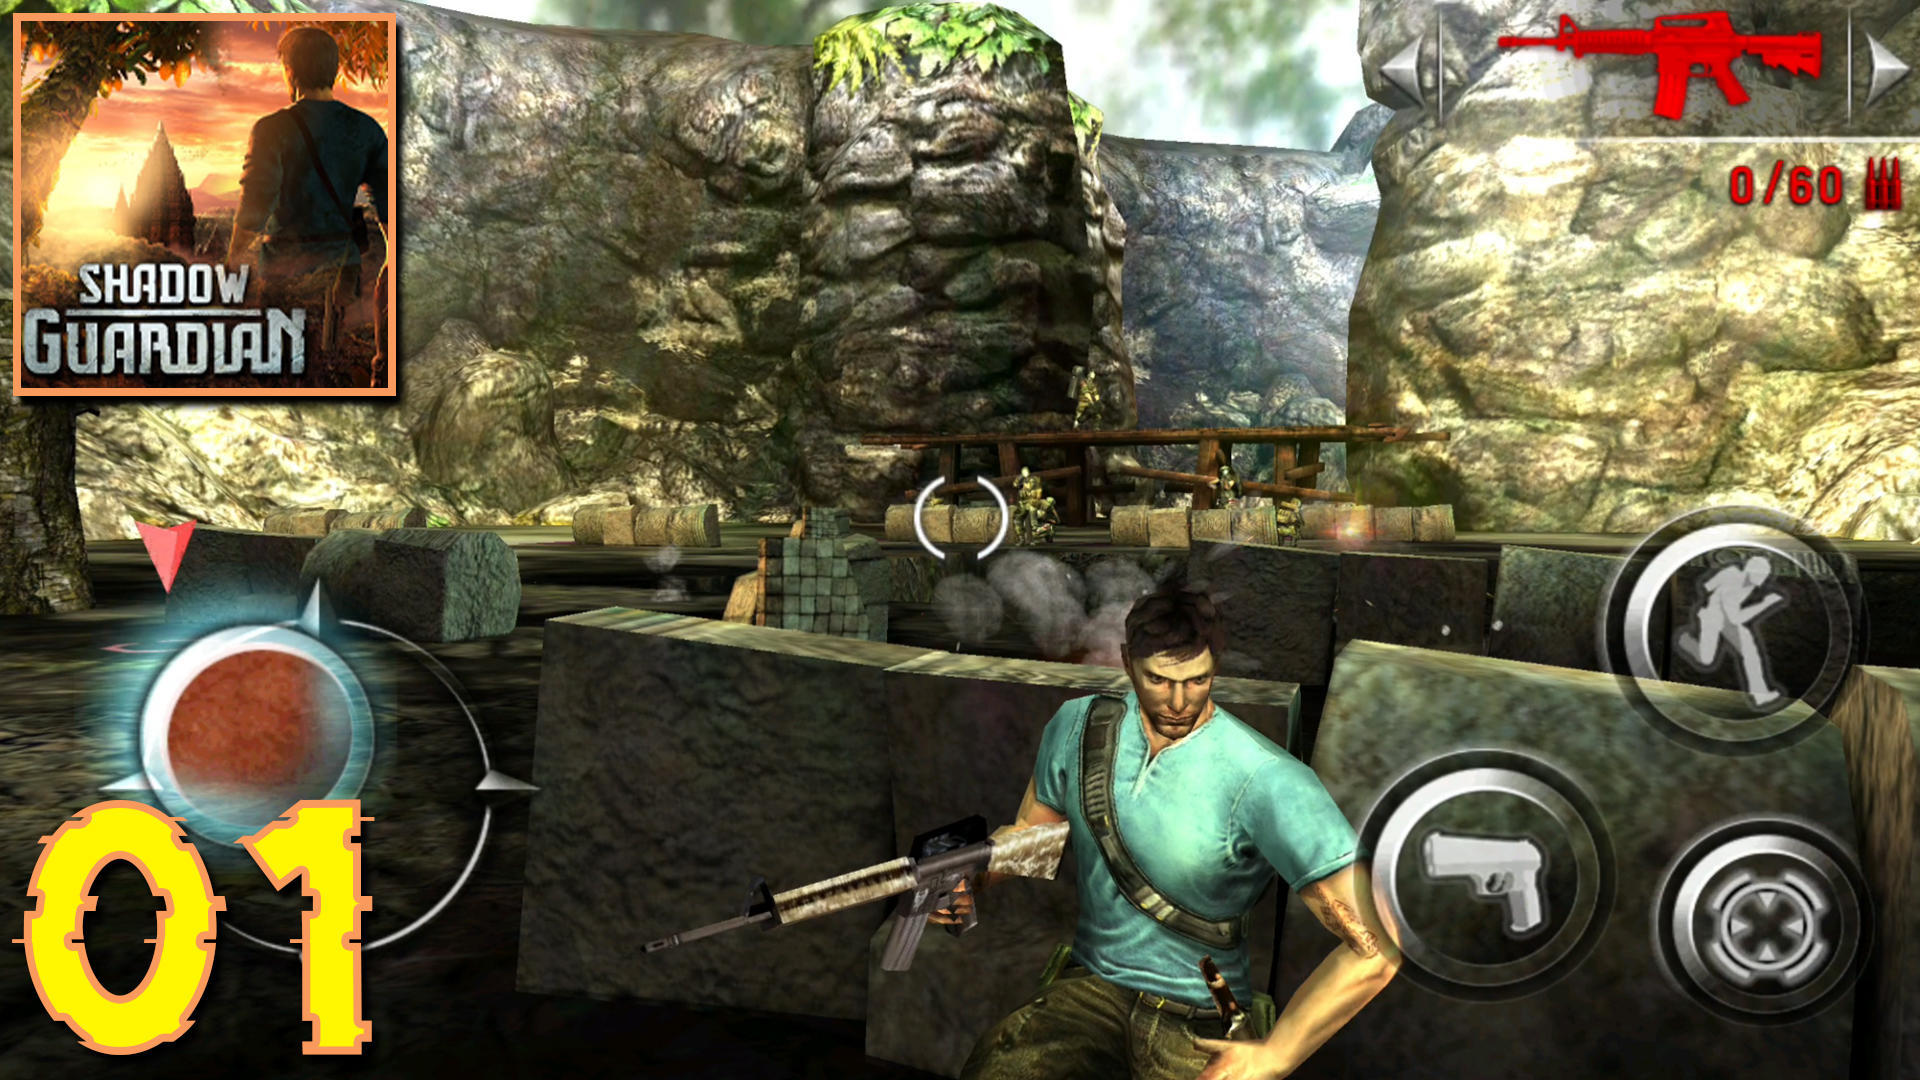 Download Uncharted Island: Survival RPG android on PC